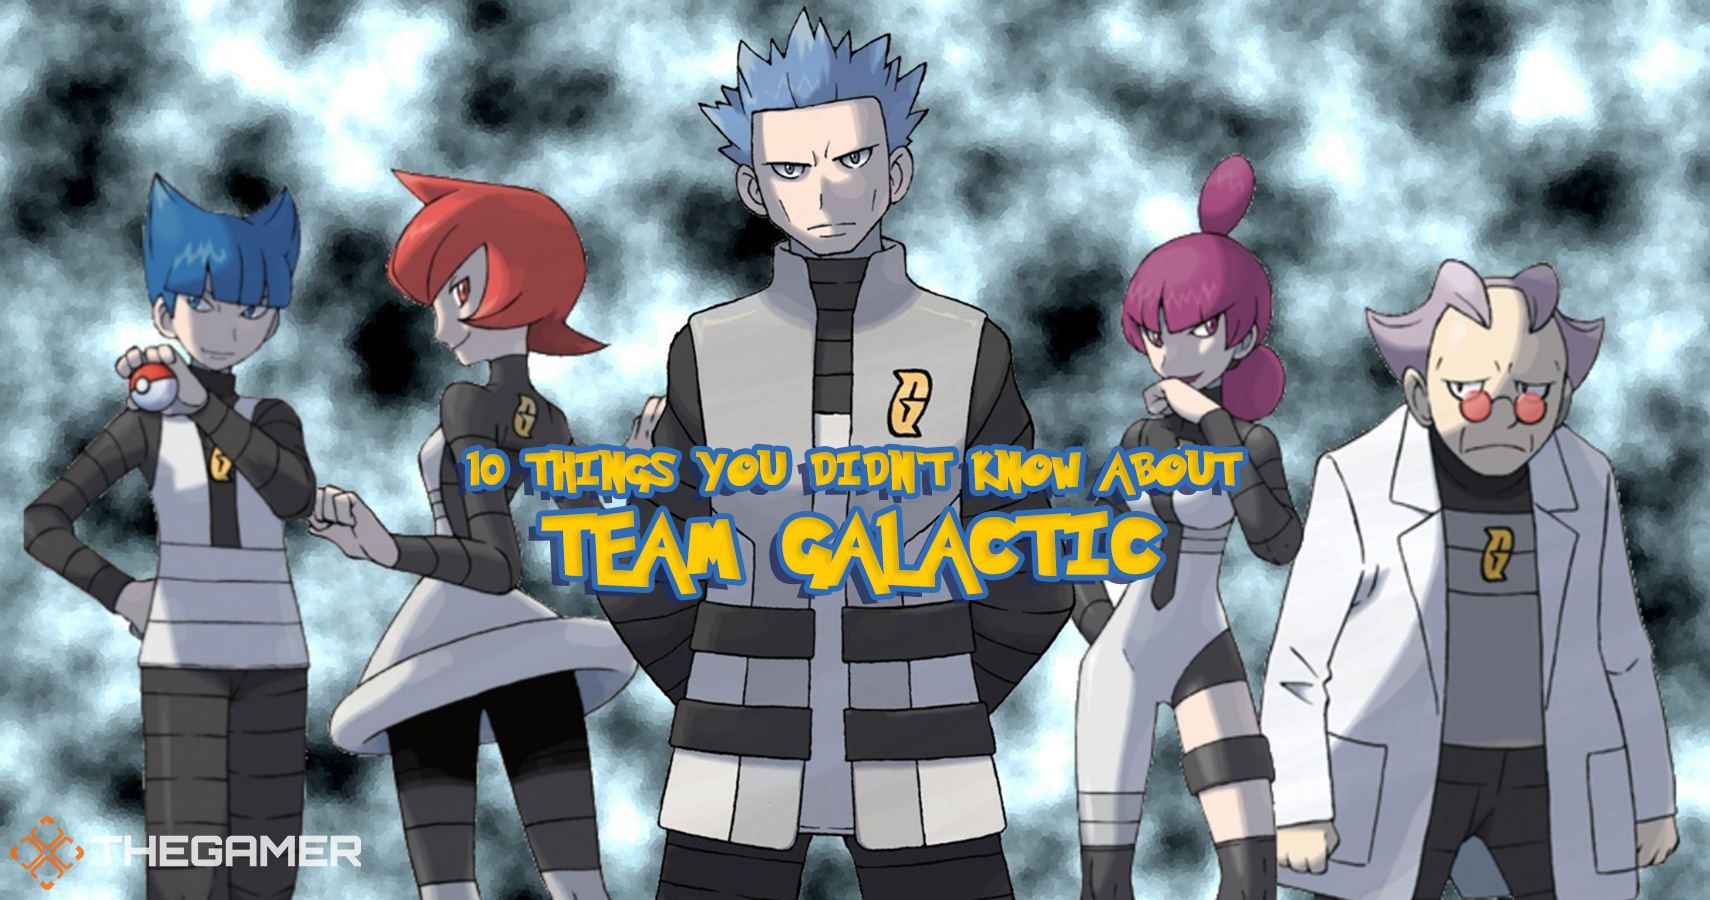 Pokemon 10 Things You Didnt Know About Team Galactic